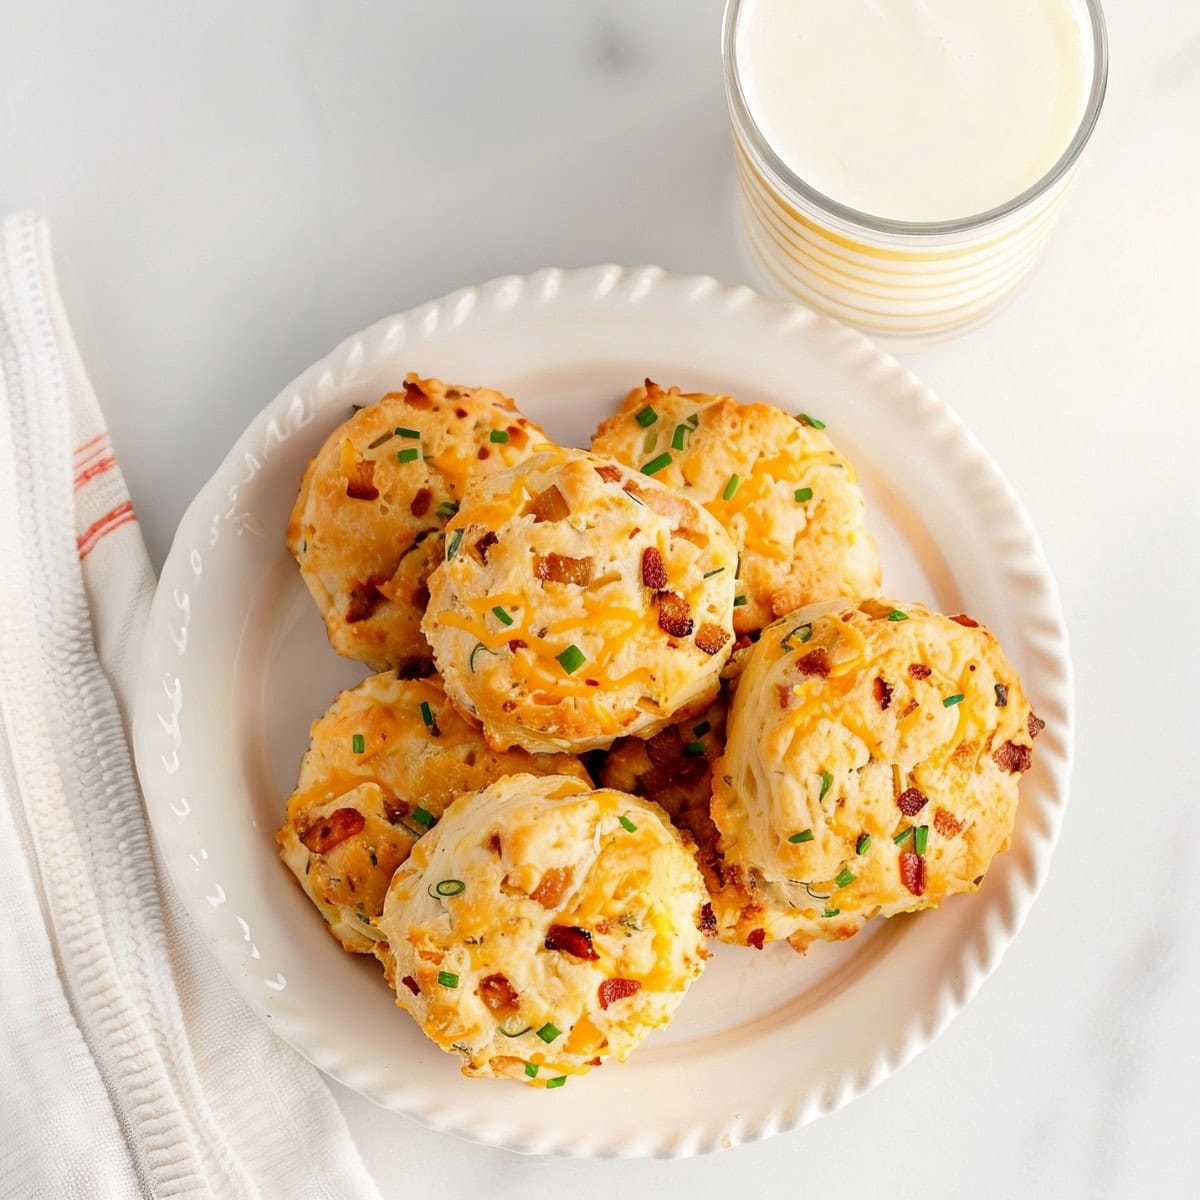 Homemade bacon cheddar biscuits on a plate, served with milk